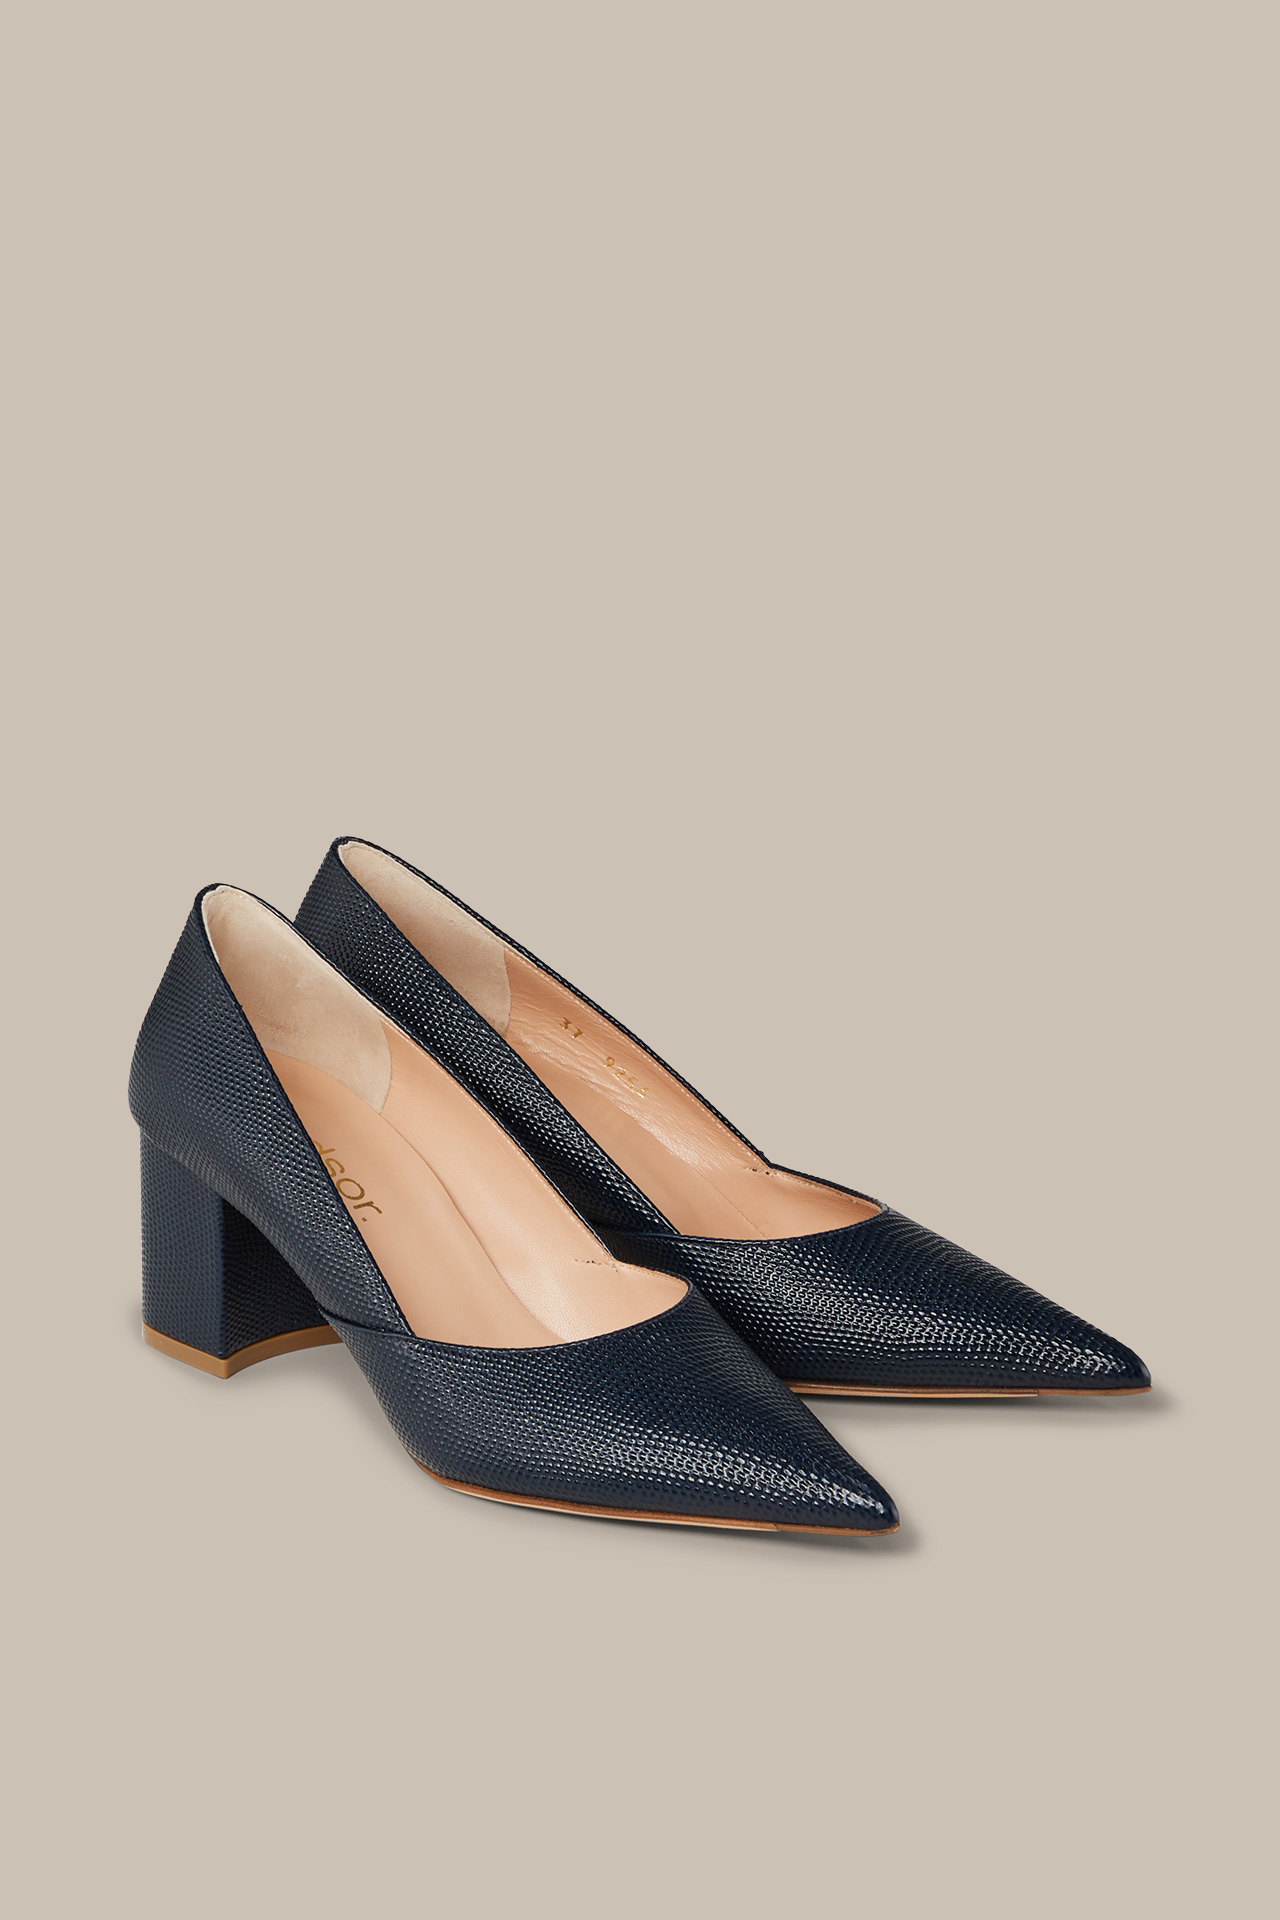 Nappa Leather Pumps with Block Heel in Blue, by Unützer